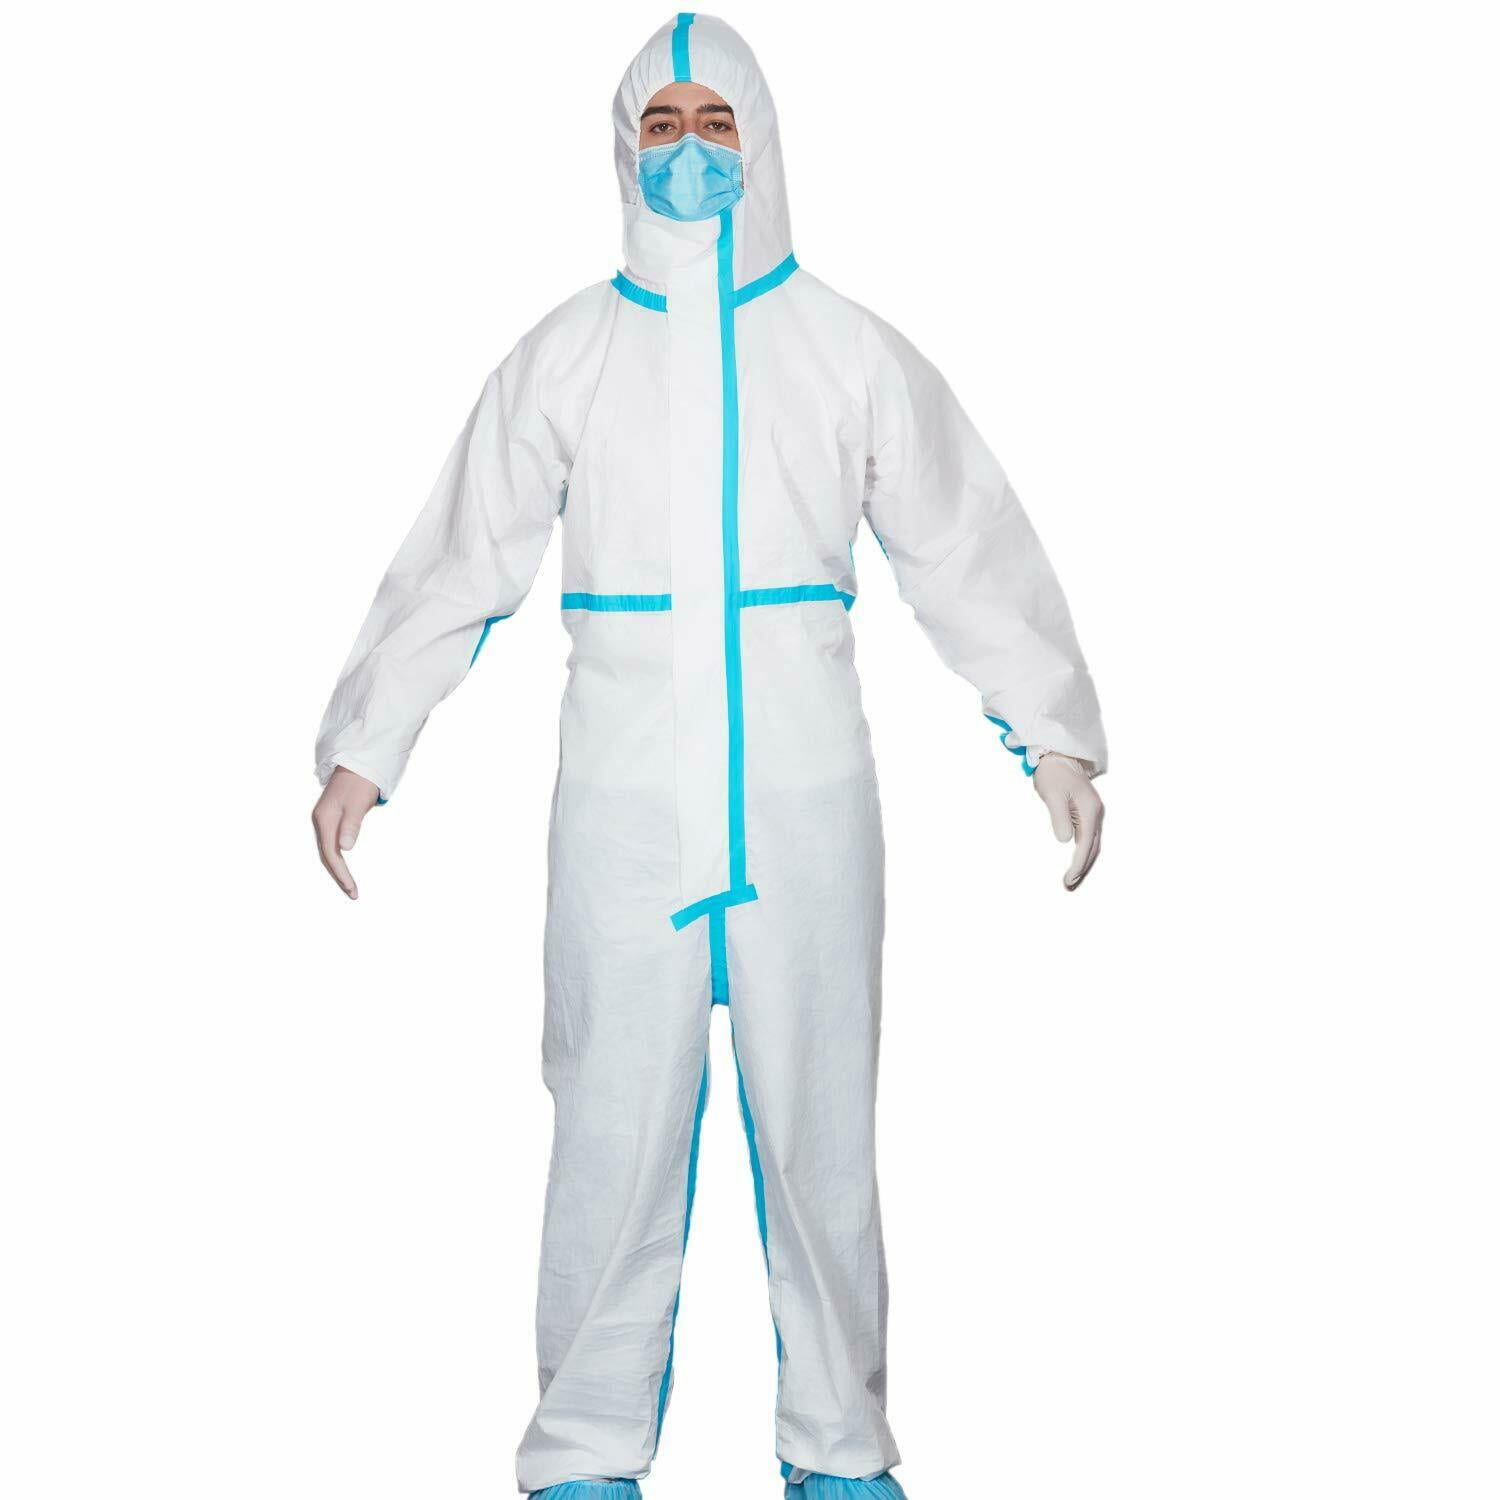 Reusable Protective Coveralls Suit Splashproof Protective Isolation Clothing PPE 